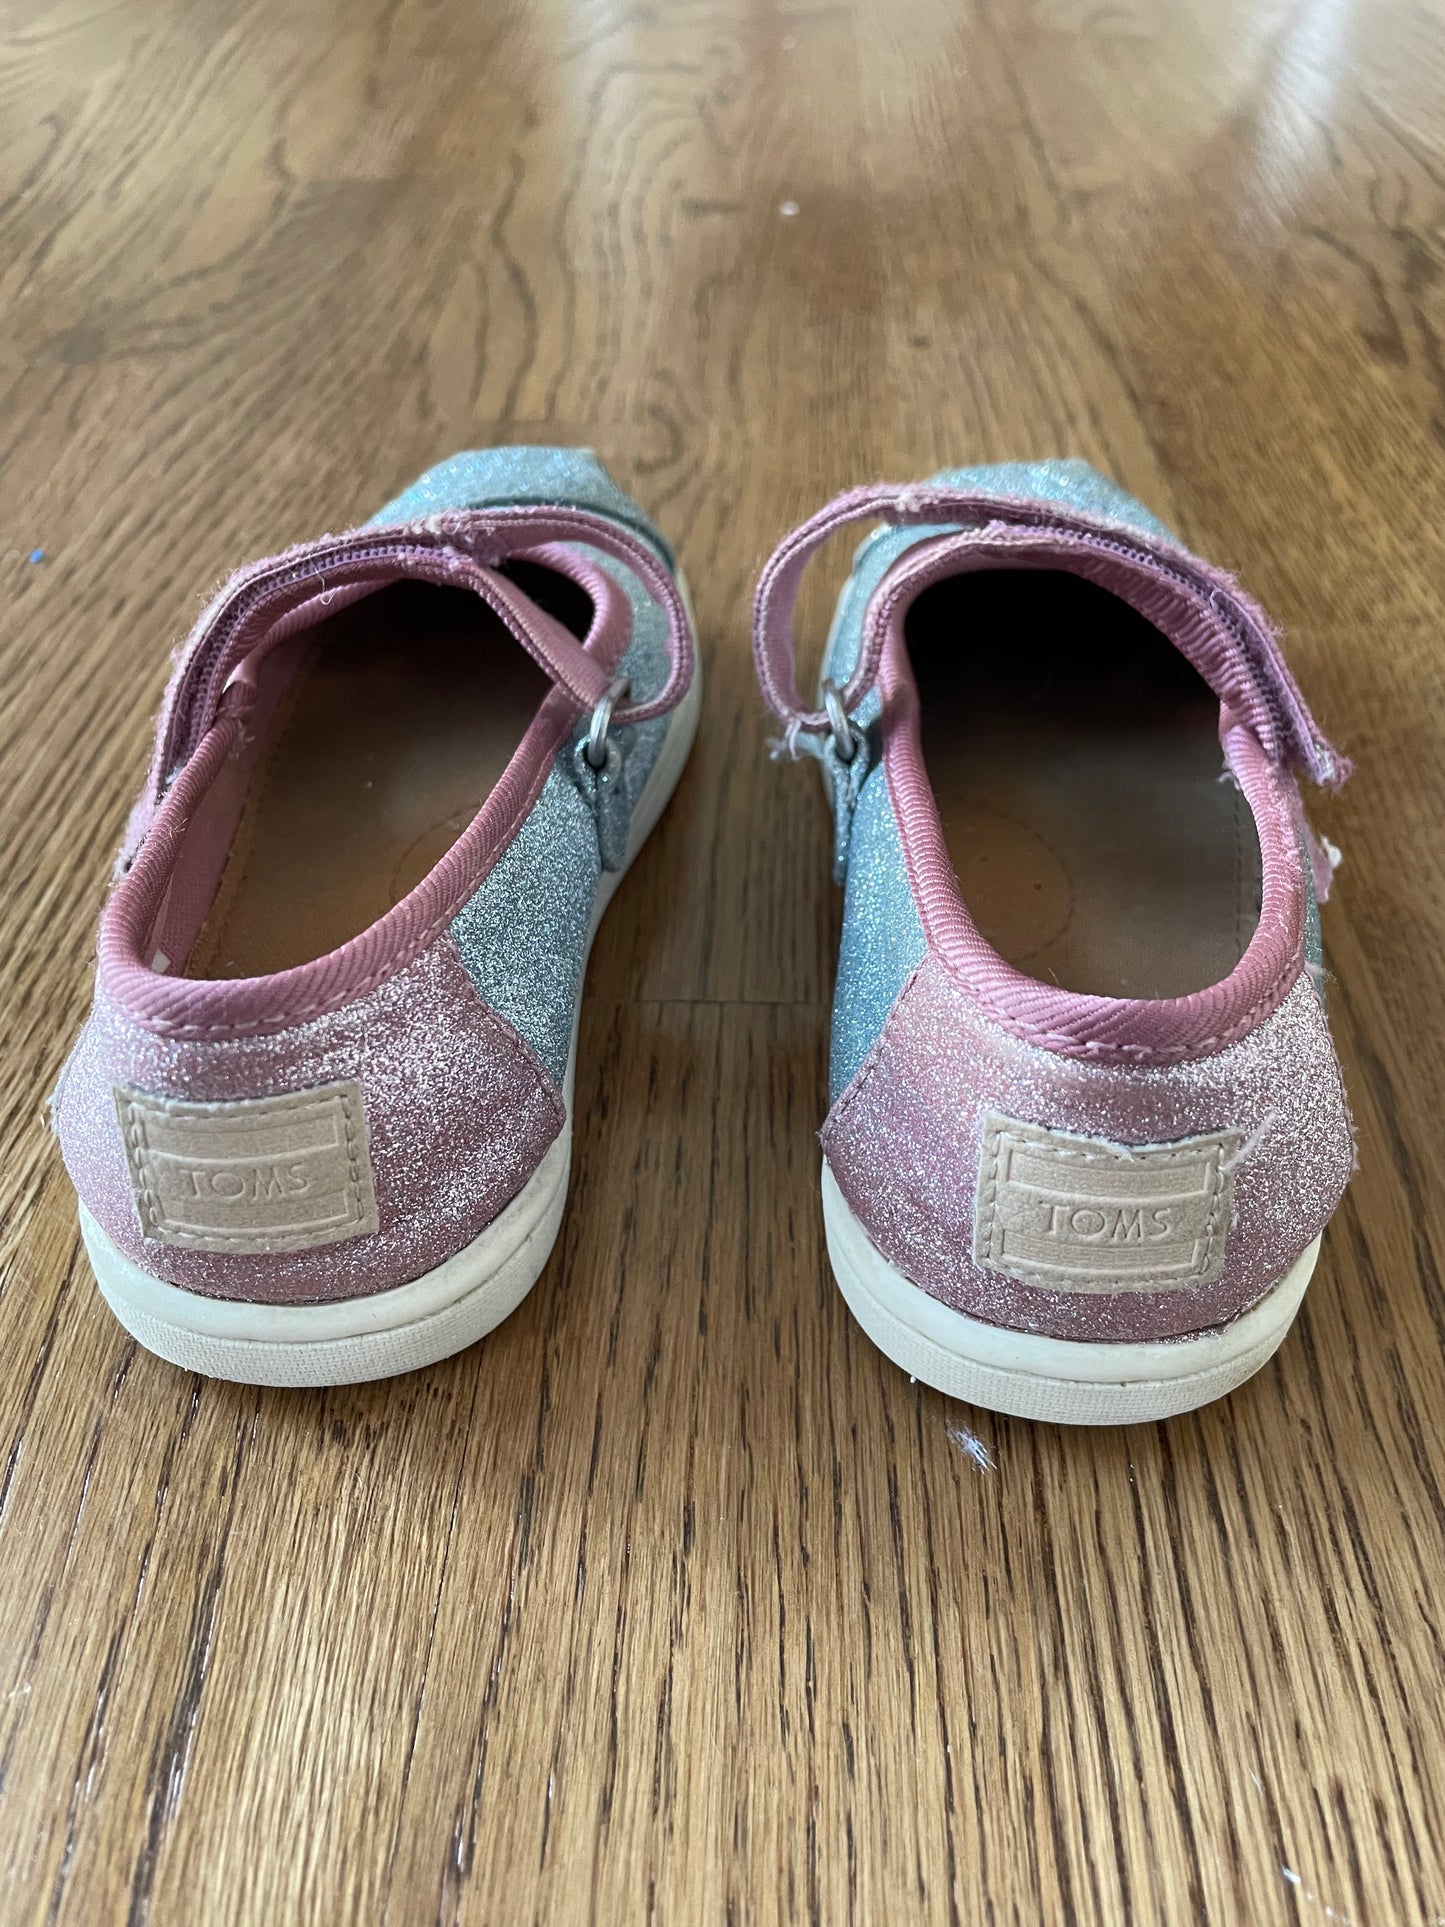 Toms Girls Blue Glitter/Pink Mary Jane shoe toddler size 8